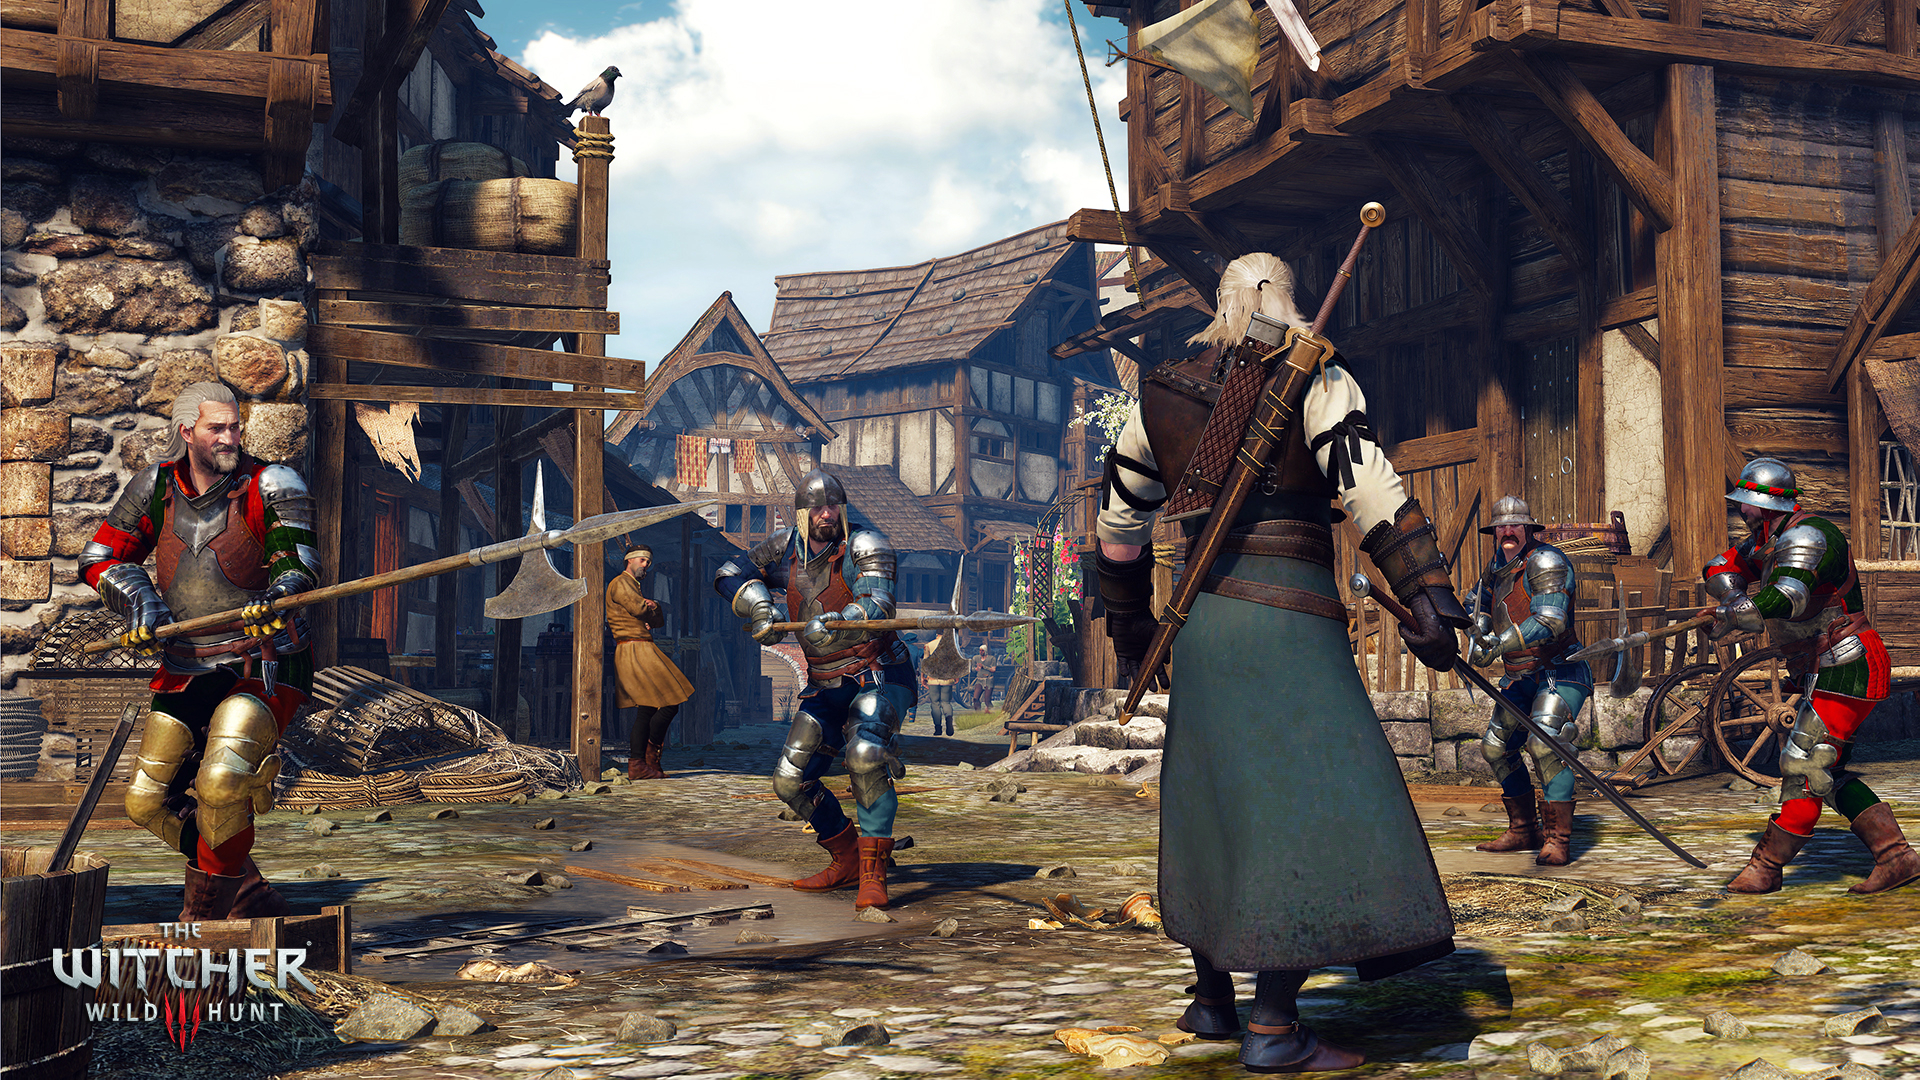 the witcher 3 beginners guide download free